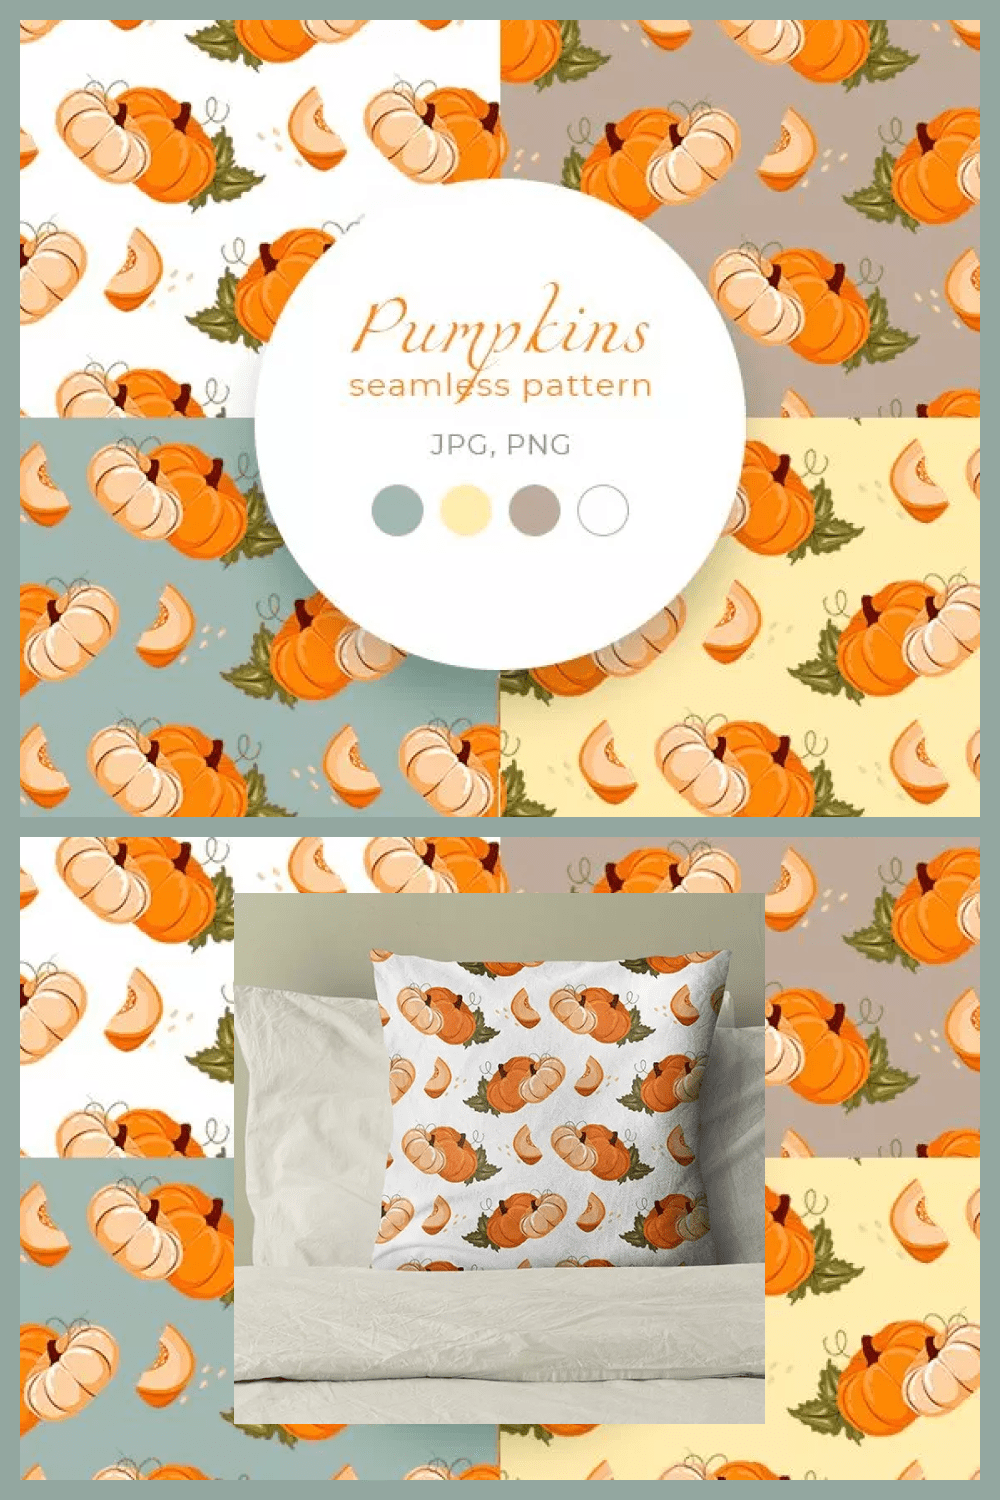 Collage of seamless patterns with pumpkins.